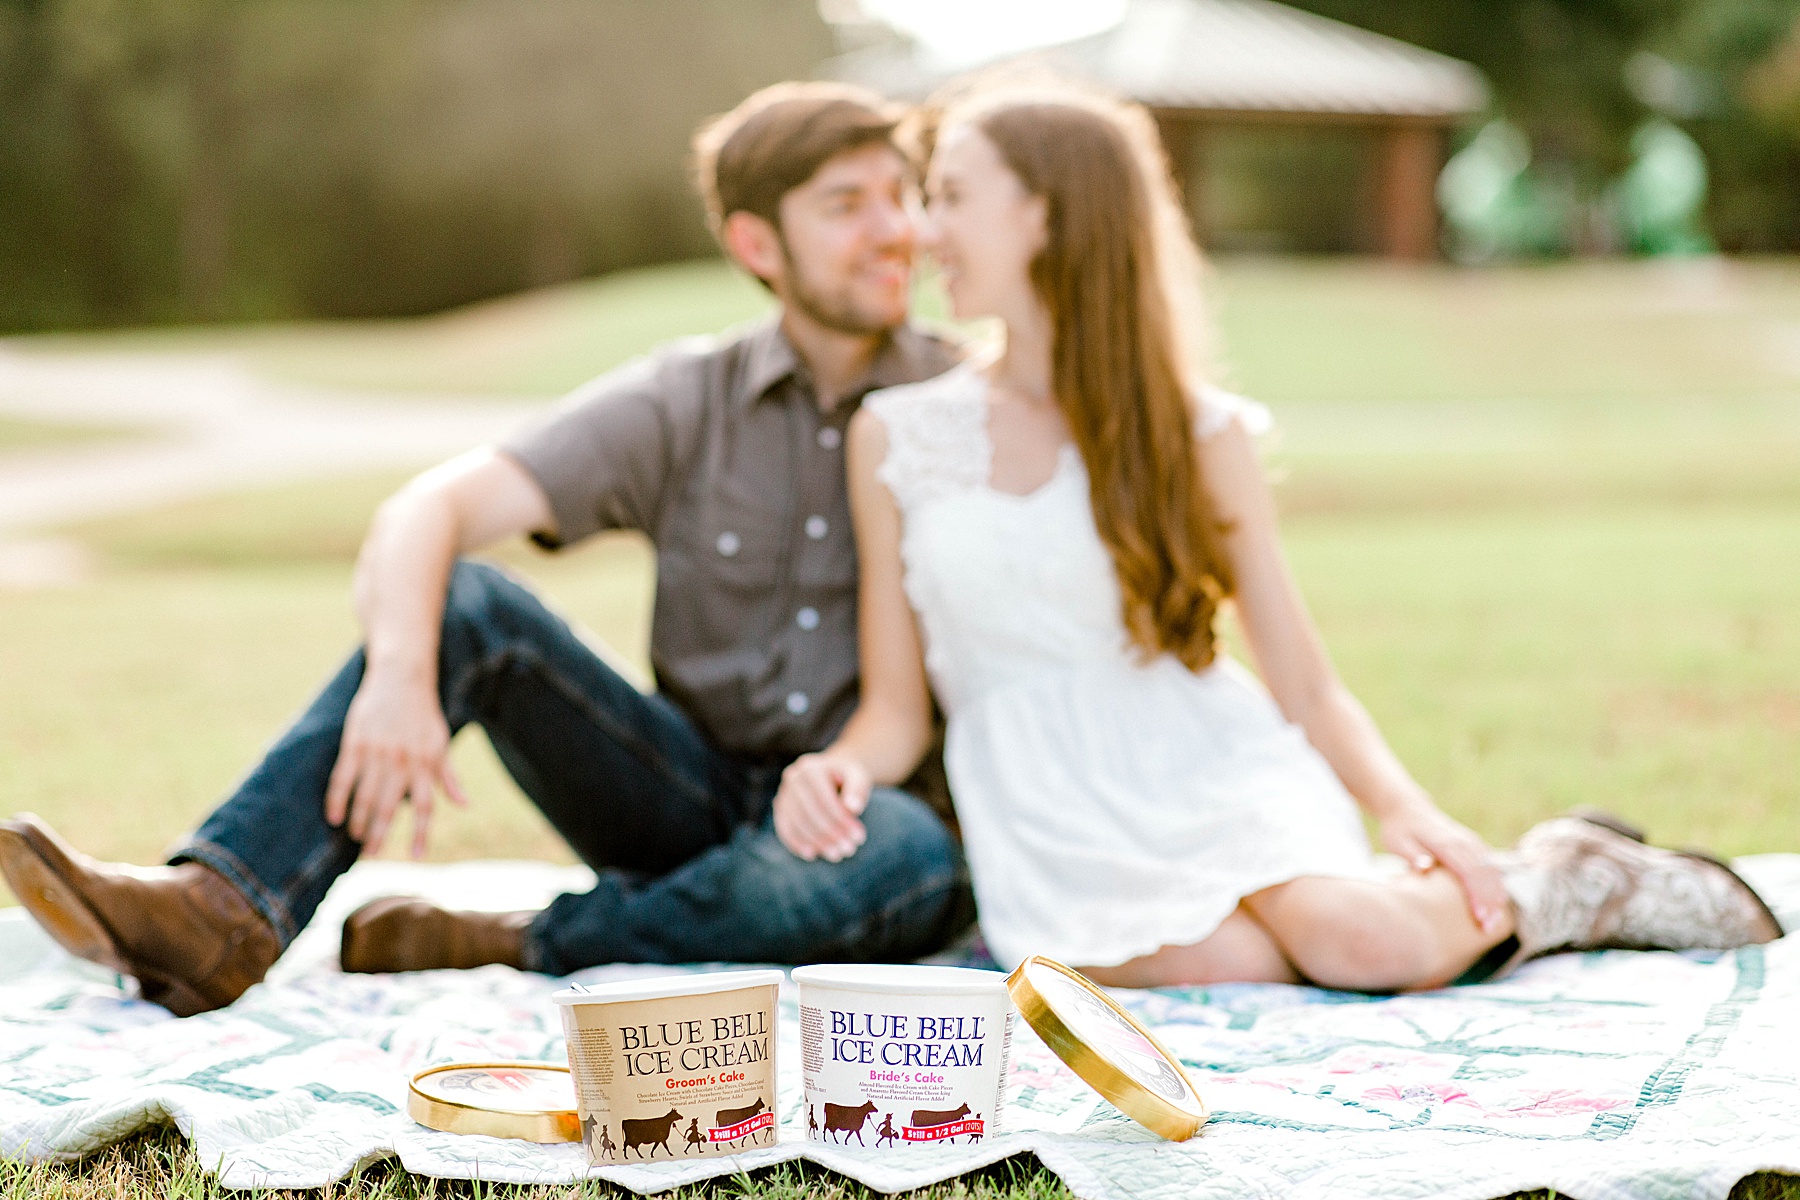 Summer Creek Engagement Session (Flower Mound, Texas) | Becca Sue Photography - www.beccasuephotography.com